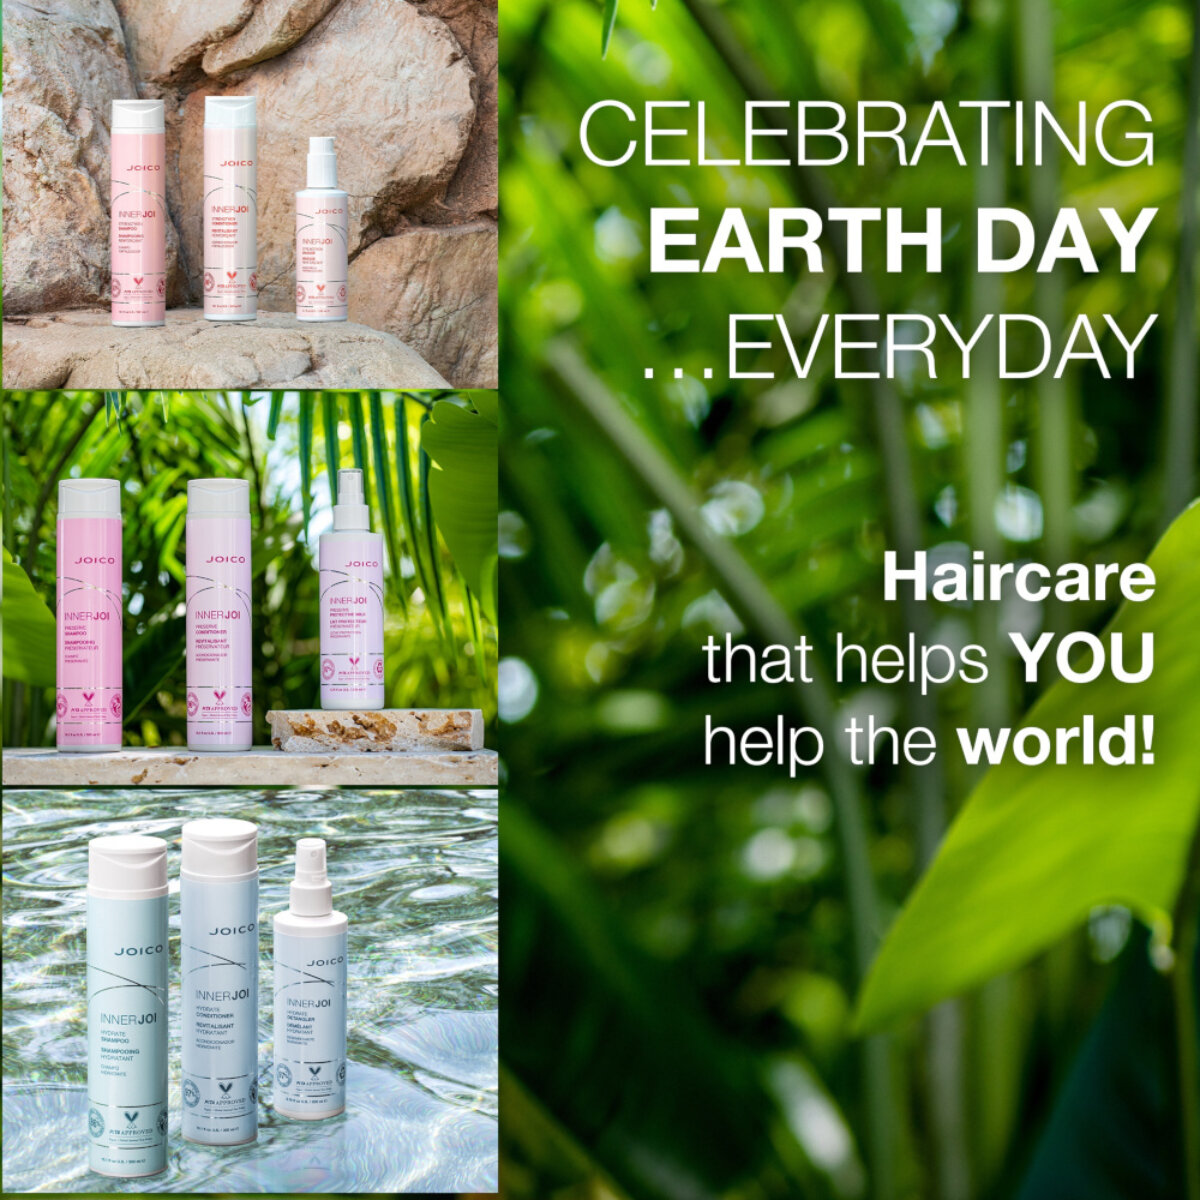 joico innerjoi products - celebrating earth day